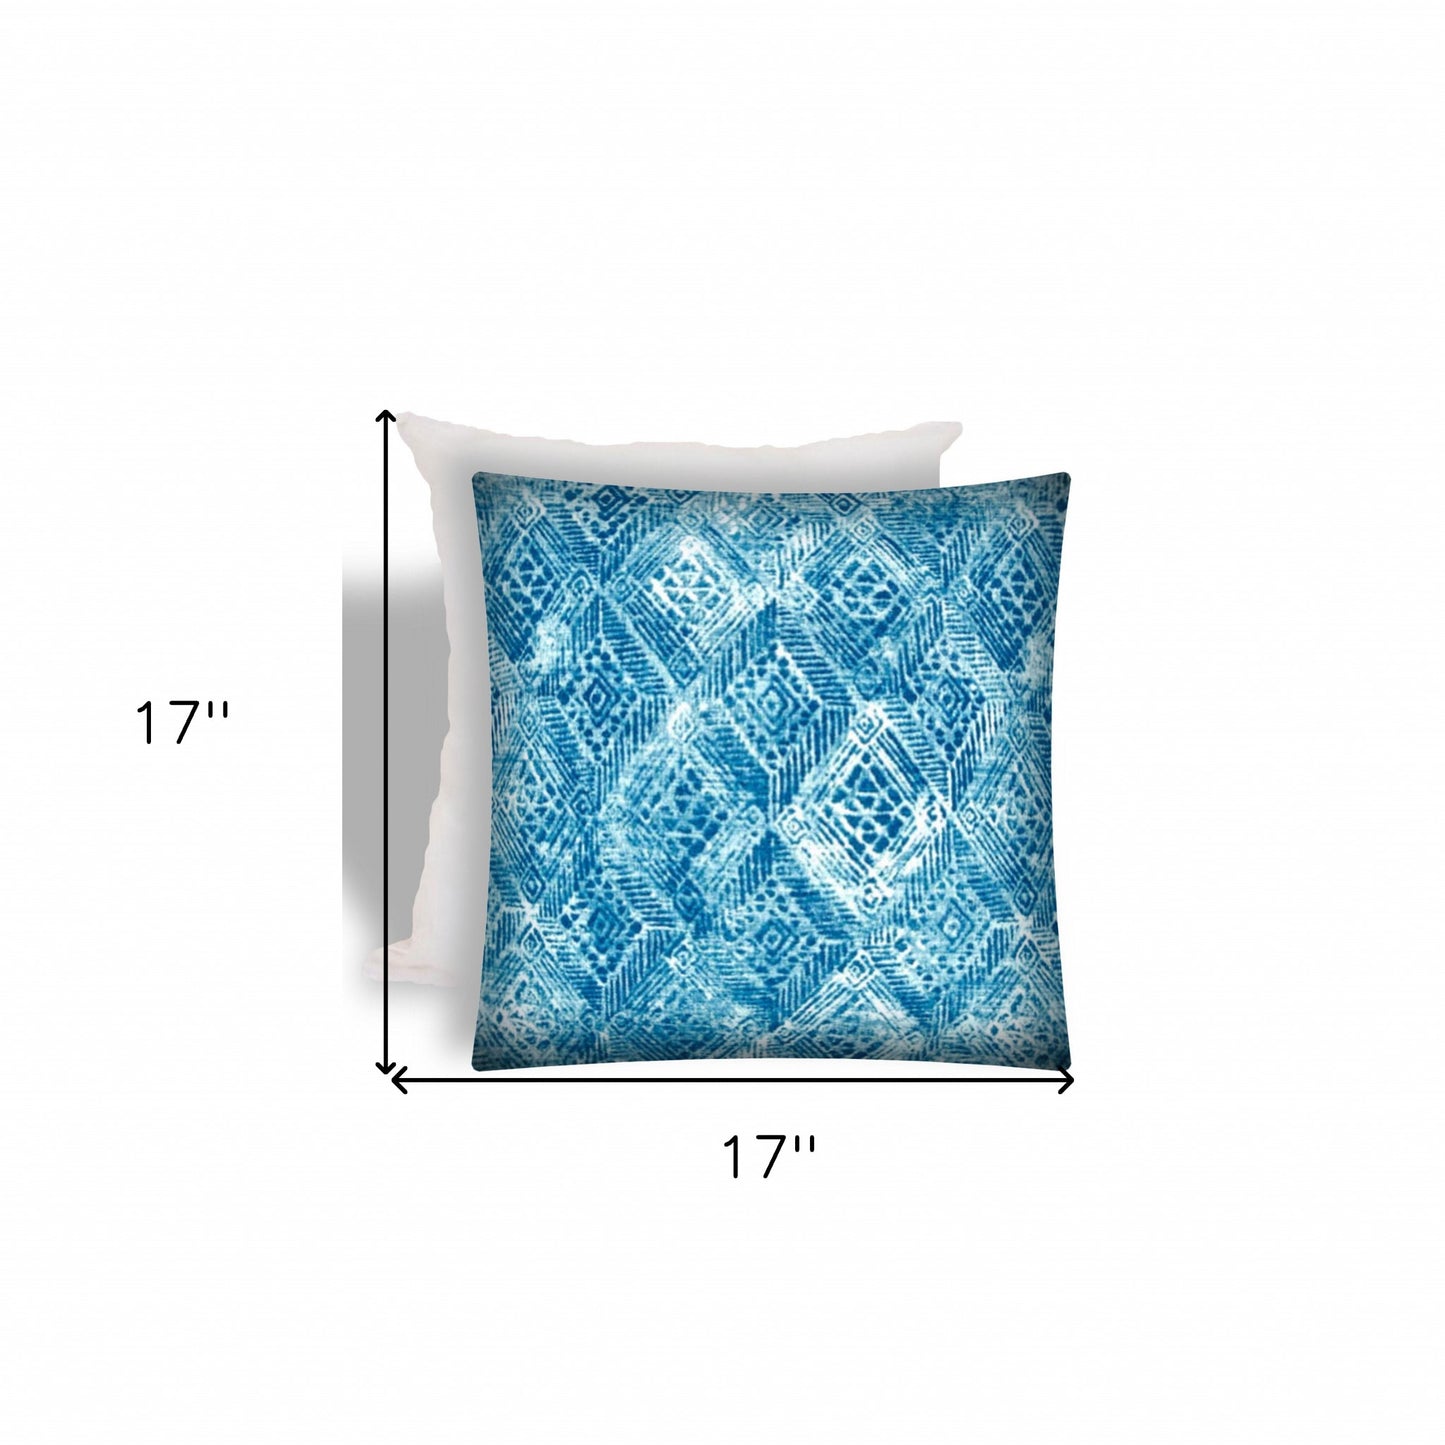 17" X 17" Blue And White Zippered Ikat Throw Indoor Outdoor Pillow